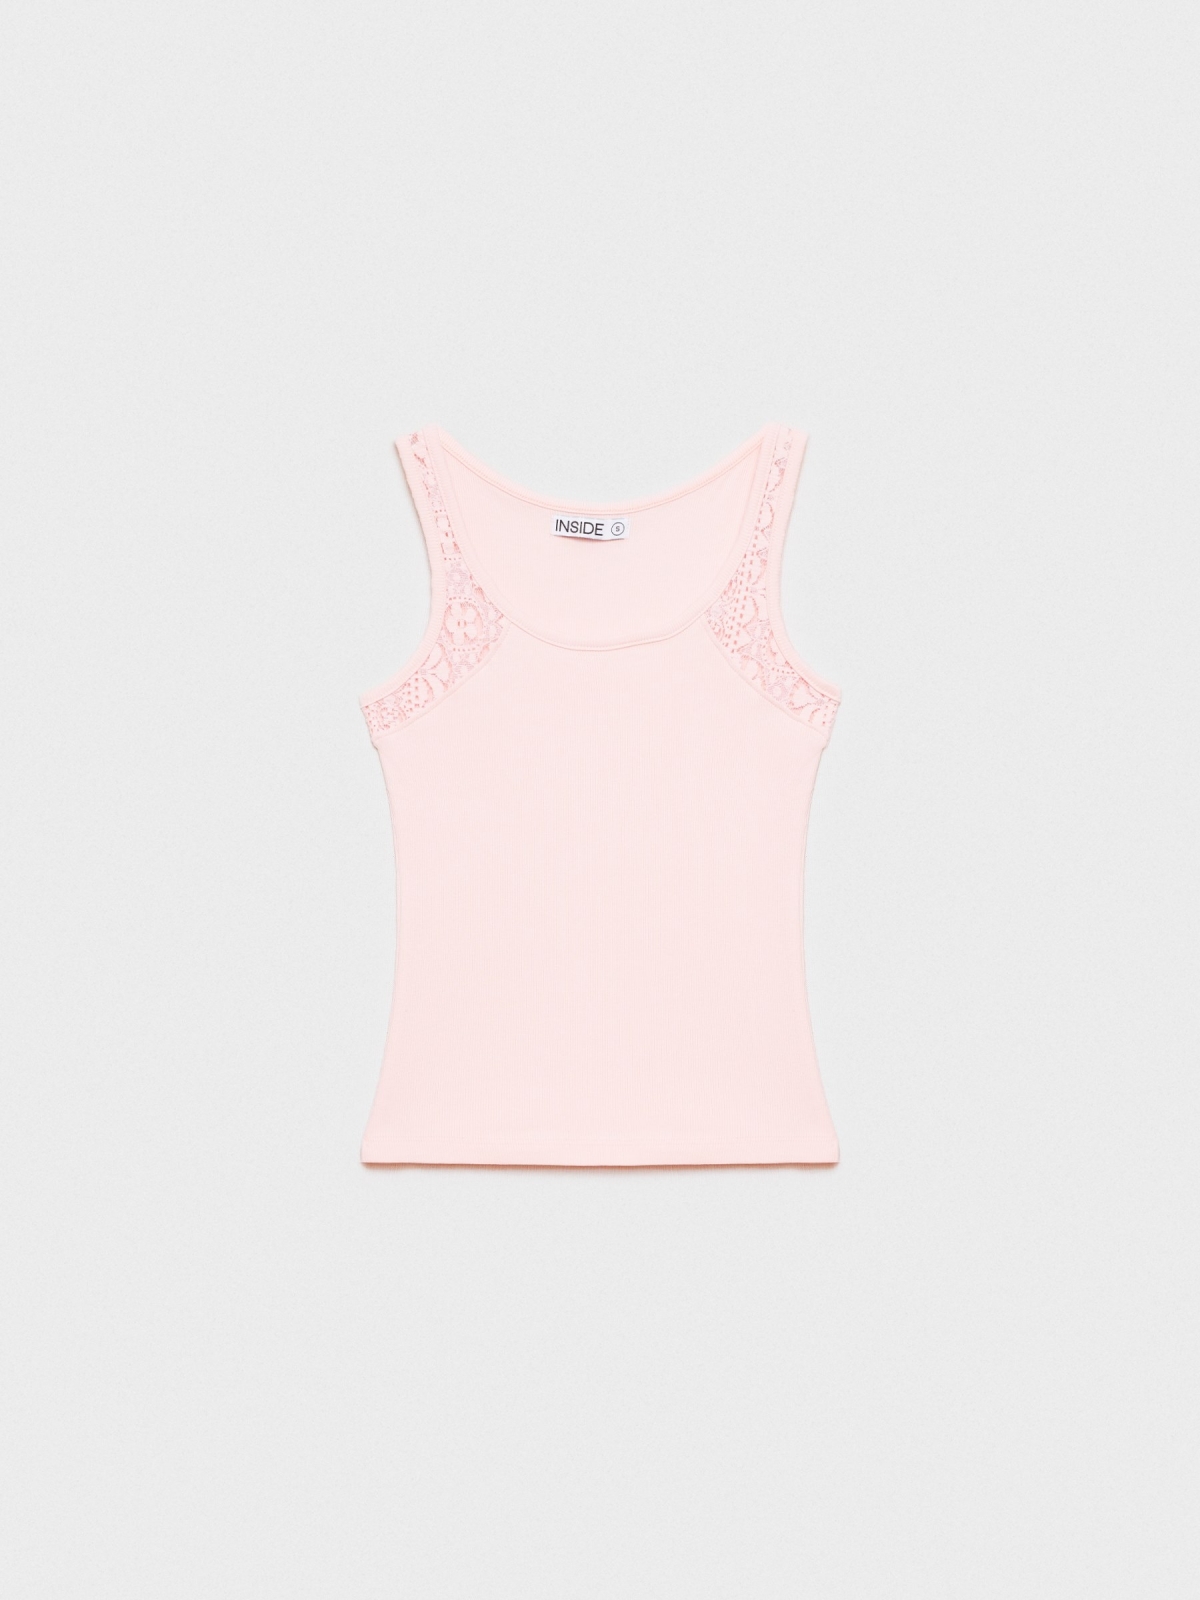  Lace tank top pink